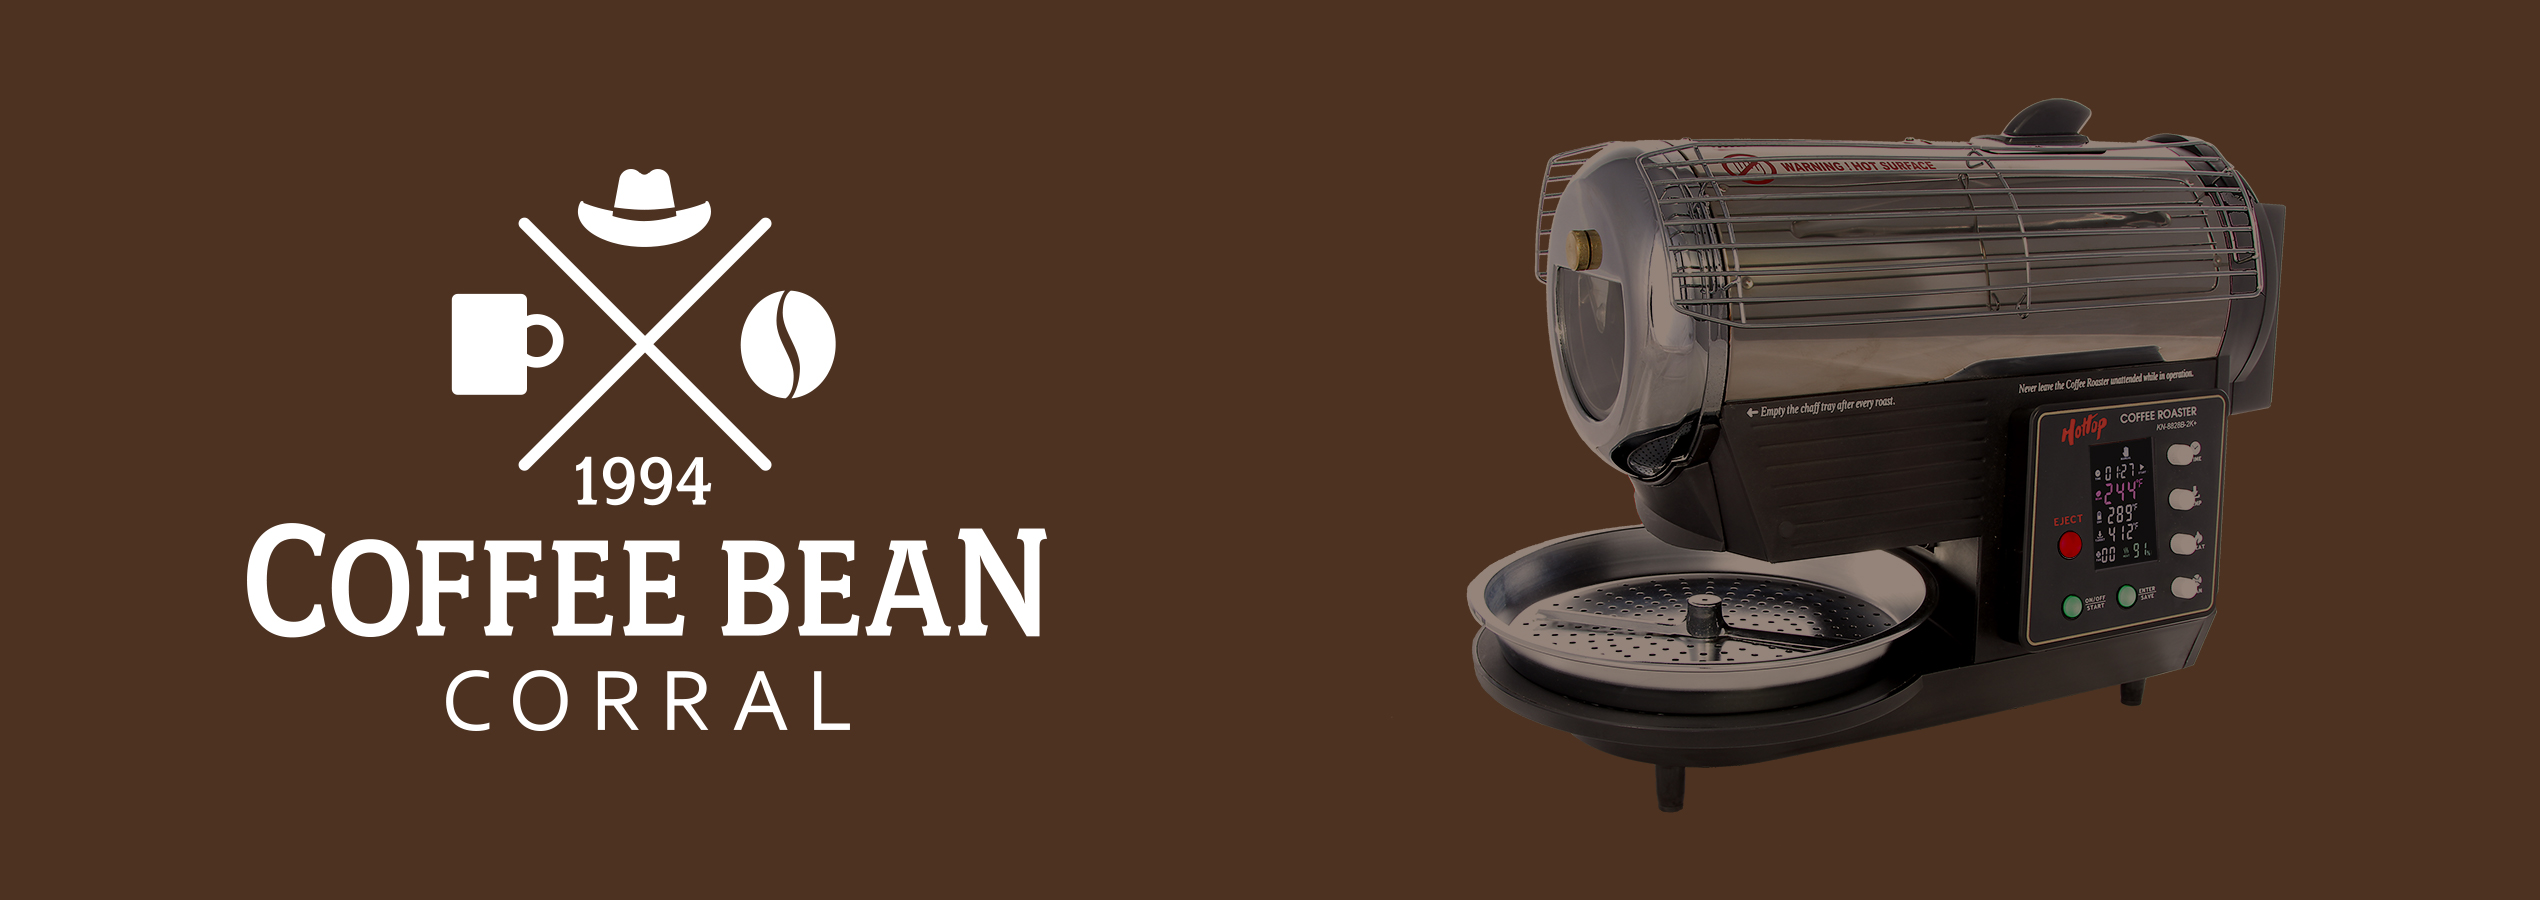 Coffee Roasting, Grinding, and Brewing Equipment